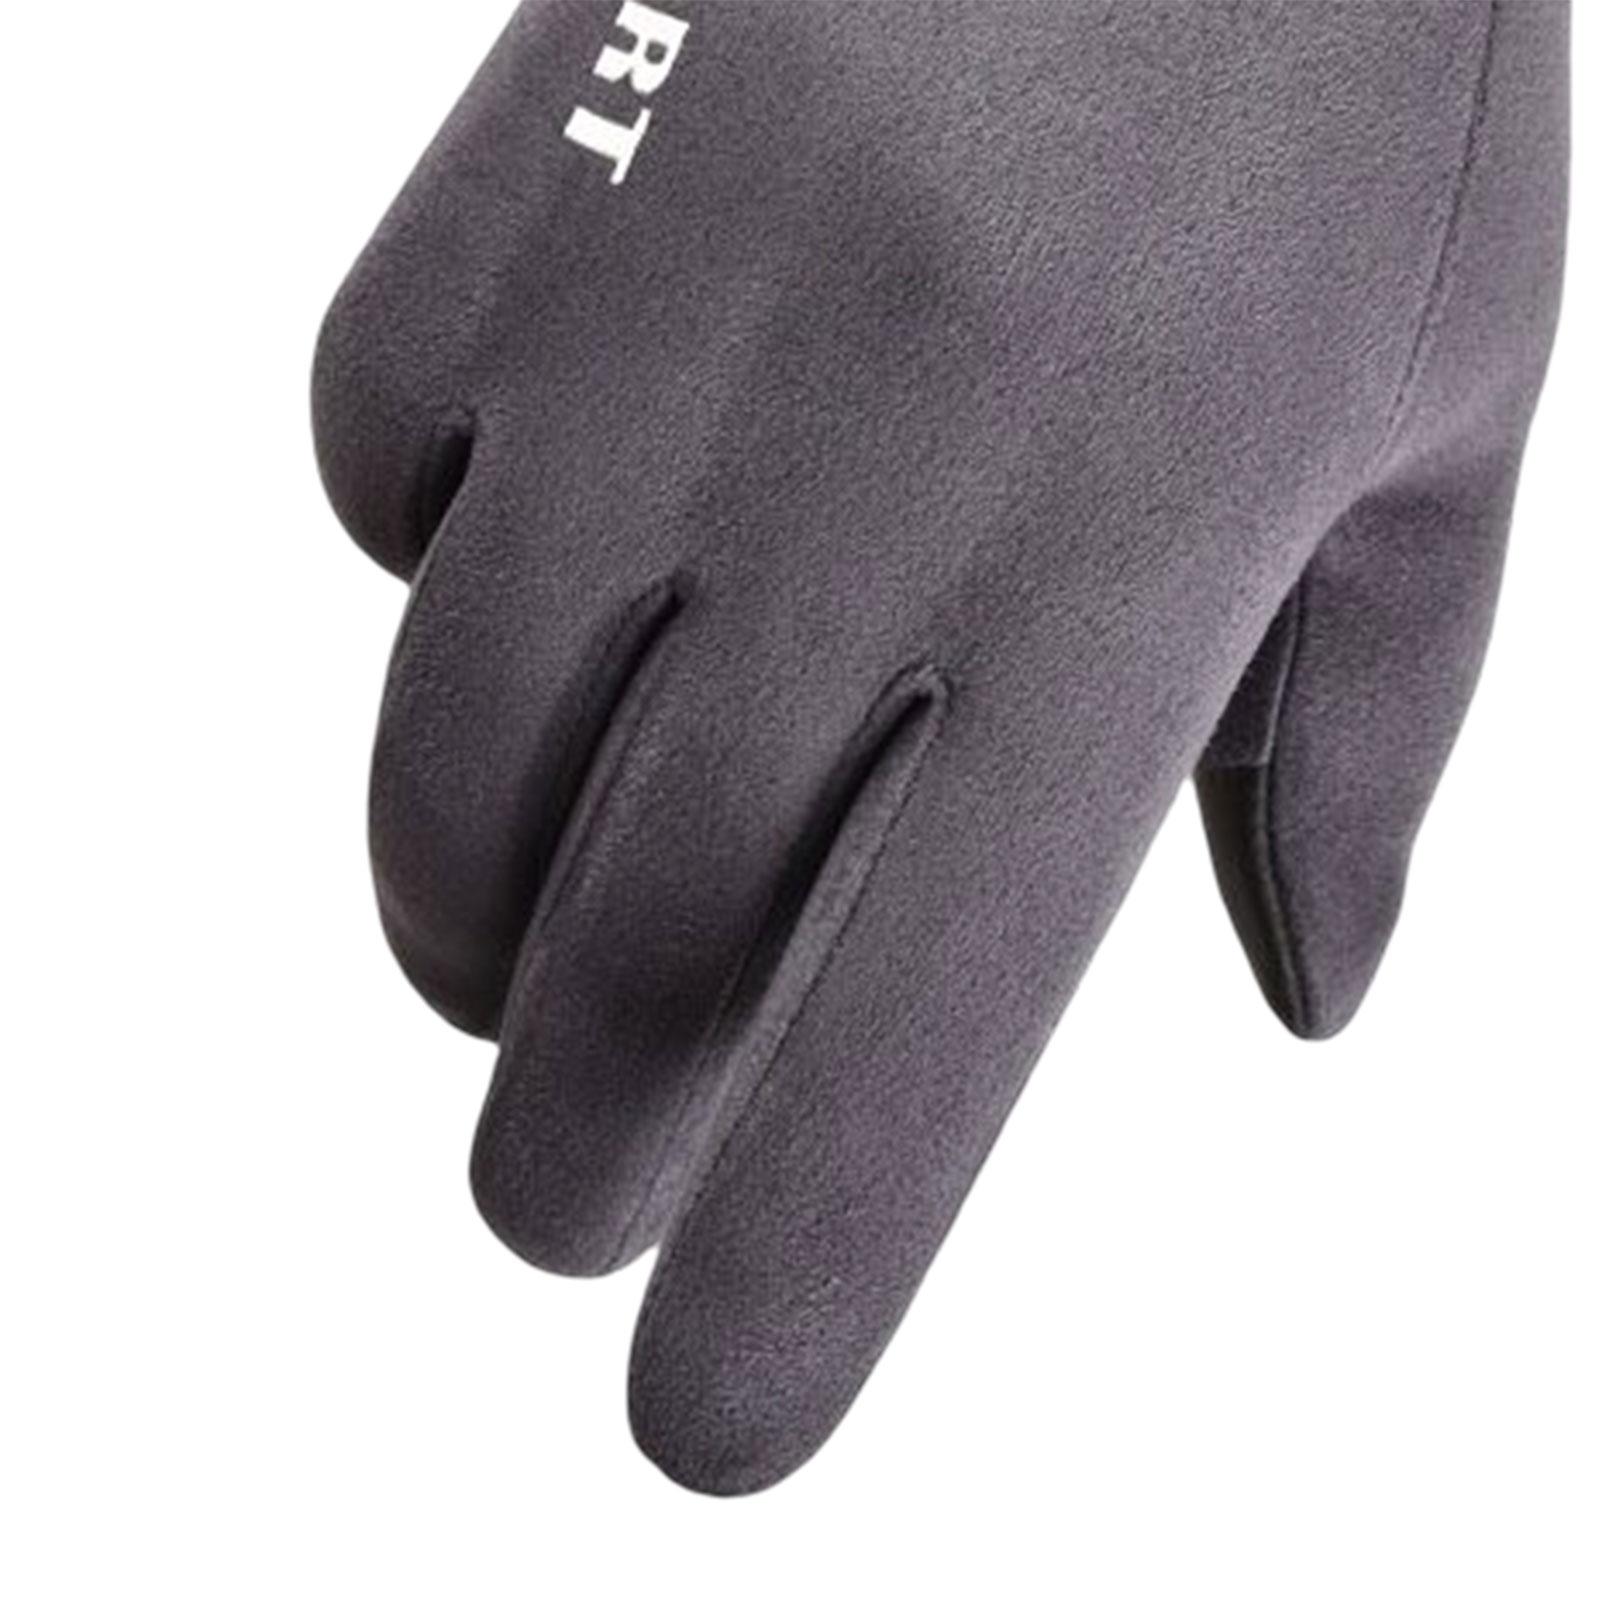 Winter Warm Sports Gloves Suede Anti Slip for Running Skating Cold Weather Women Light Grey